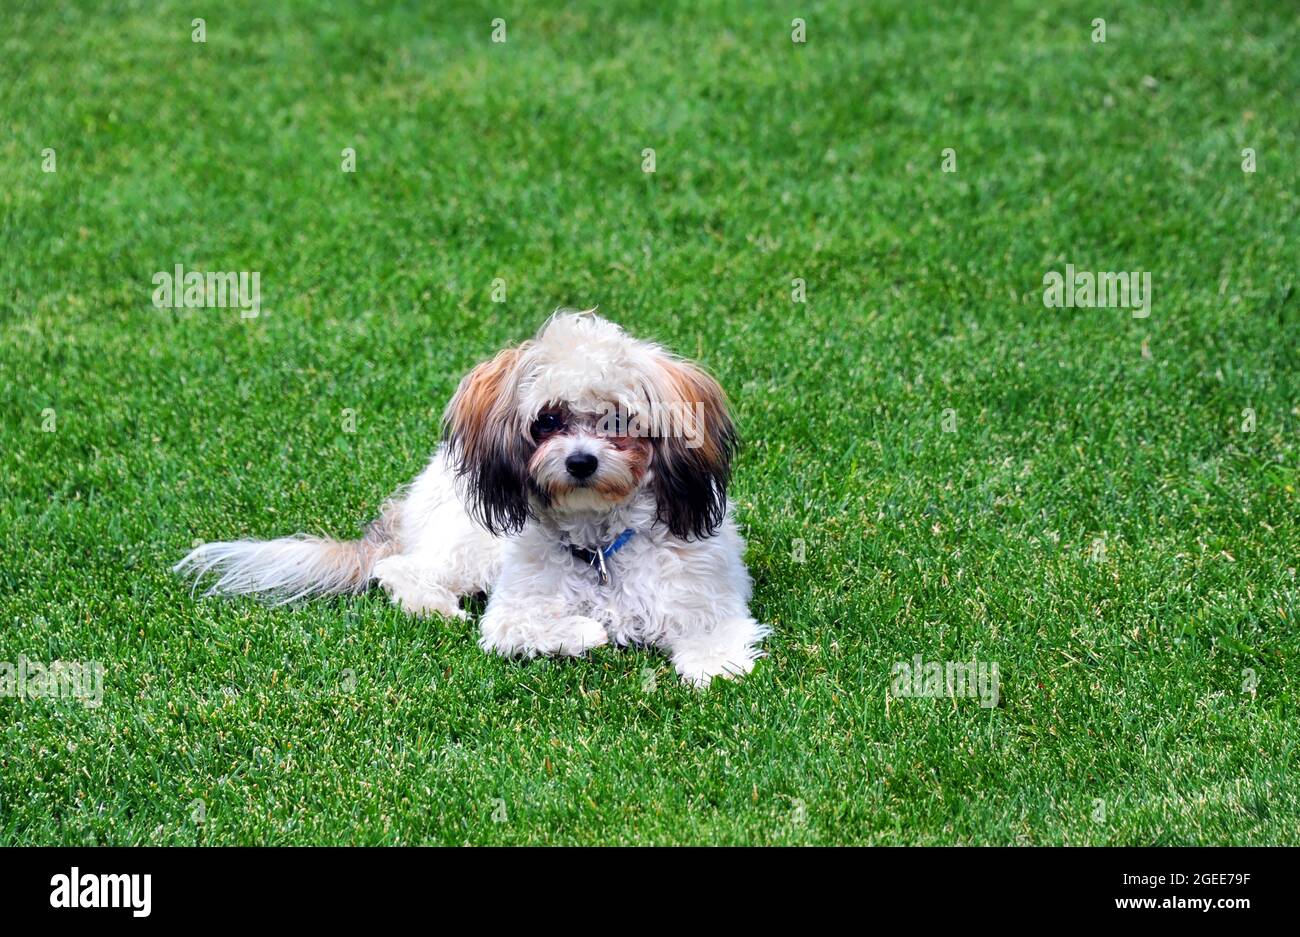 Shih Tzu and Poodle mix, called Shih Poo, enjoys layig on the cool, green grass of its yard. Stock Photo